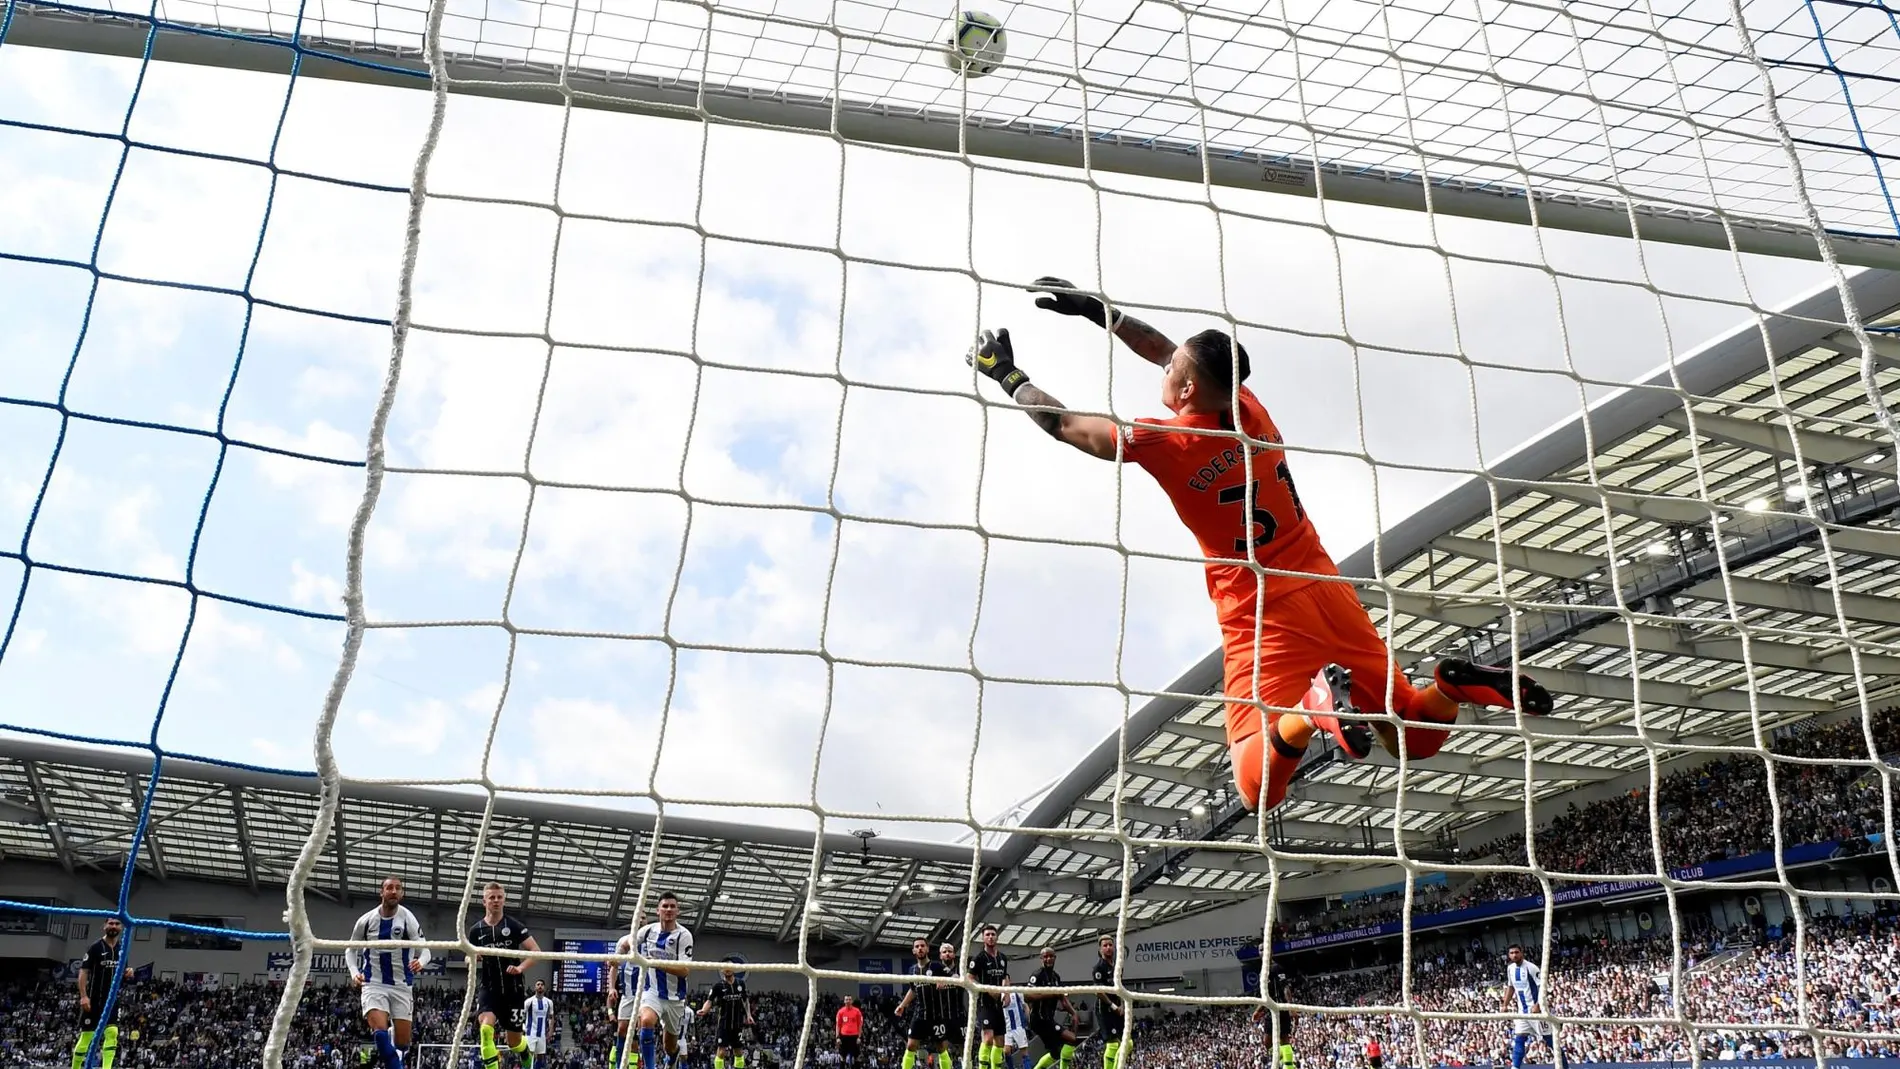 Express Community Stadium, Brighton, Britain - May 12, 2019 Manchester City's Ederson saves a shot from